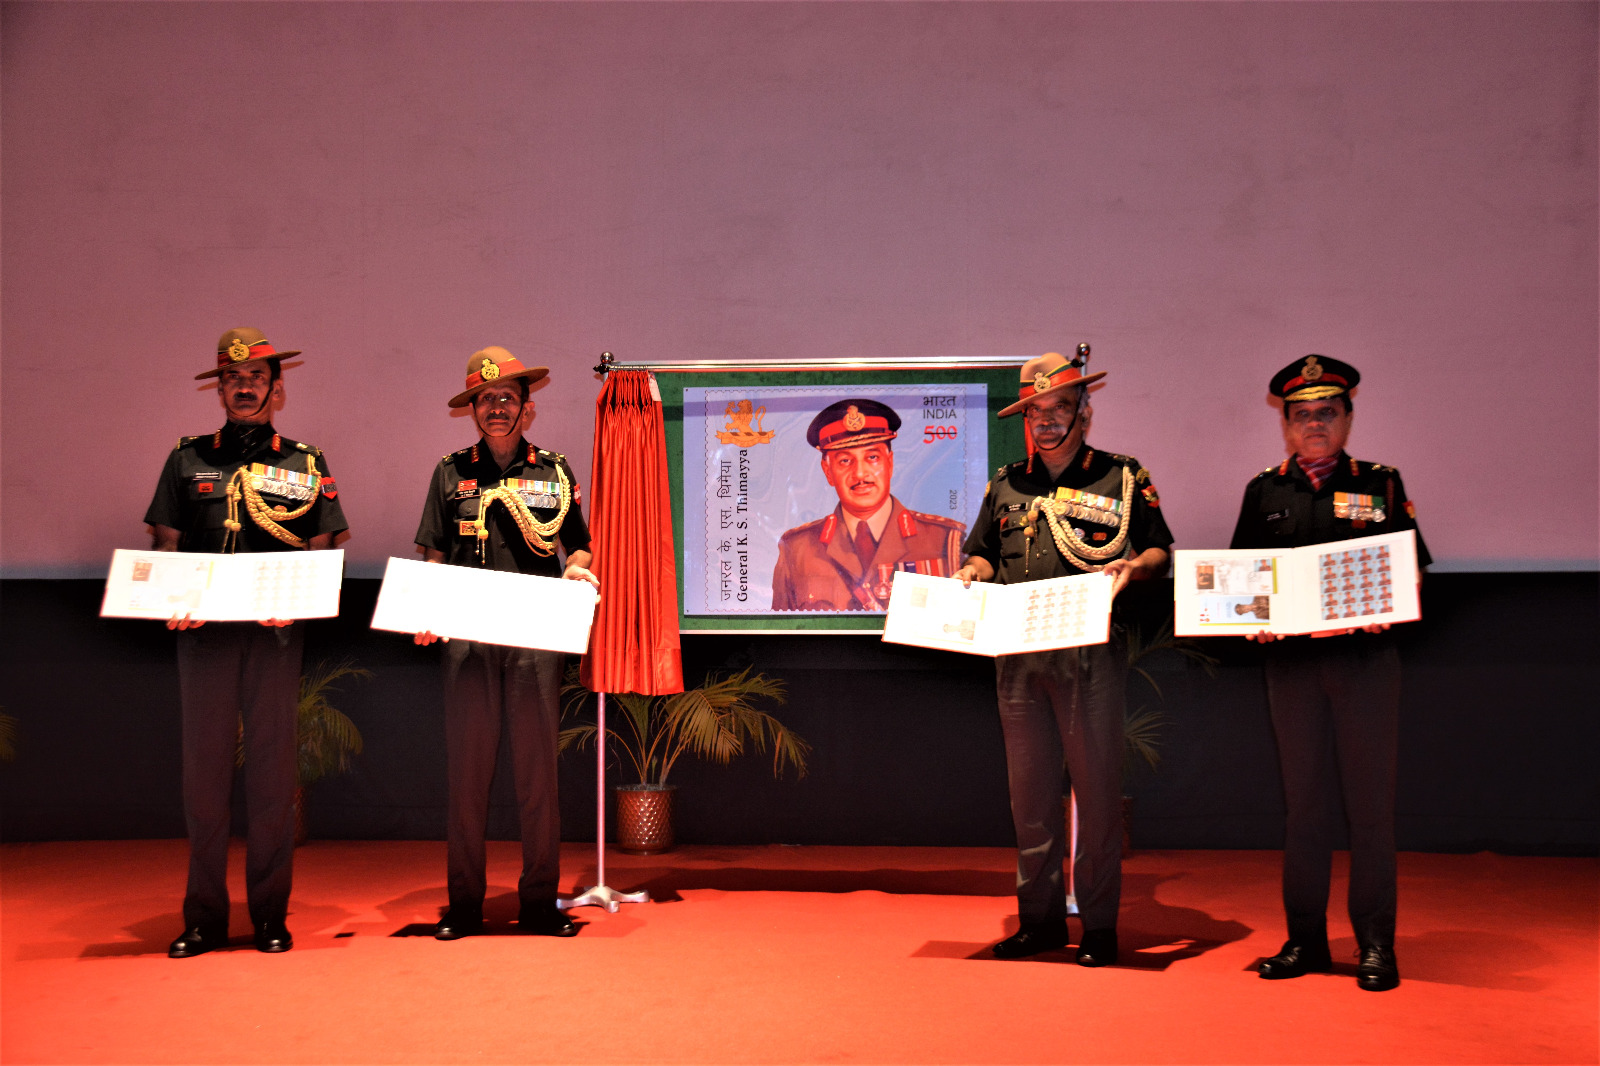 Lt General RP Kalita, PVSM, UYSM, AVSM, SM, VSM, GOC-in-C Eastern Command and Col of the KUMAON & NAGA Regts and KUMAON SCOUTS unveiled the Stamp and signed the First Day Cover in the presence of prominent dignitaries, veterans, Senior serving Army officers and the present and Ex Commanding Officers of 4 & 8 KUMAON, the Battalions where General KS Thimayya had served.